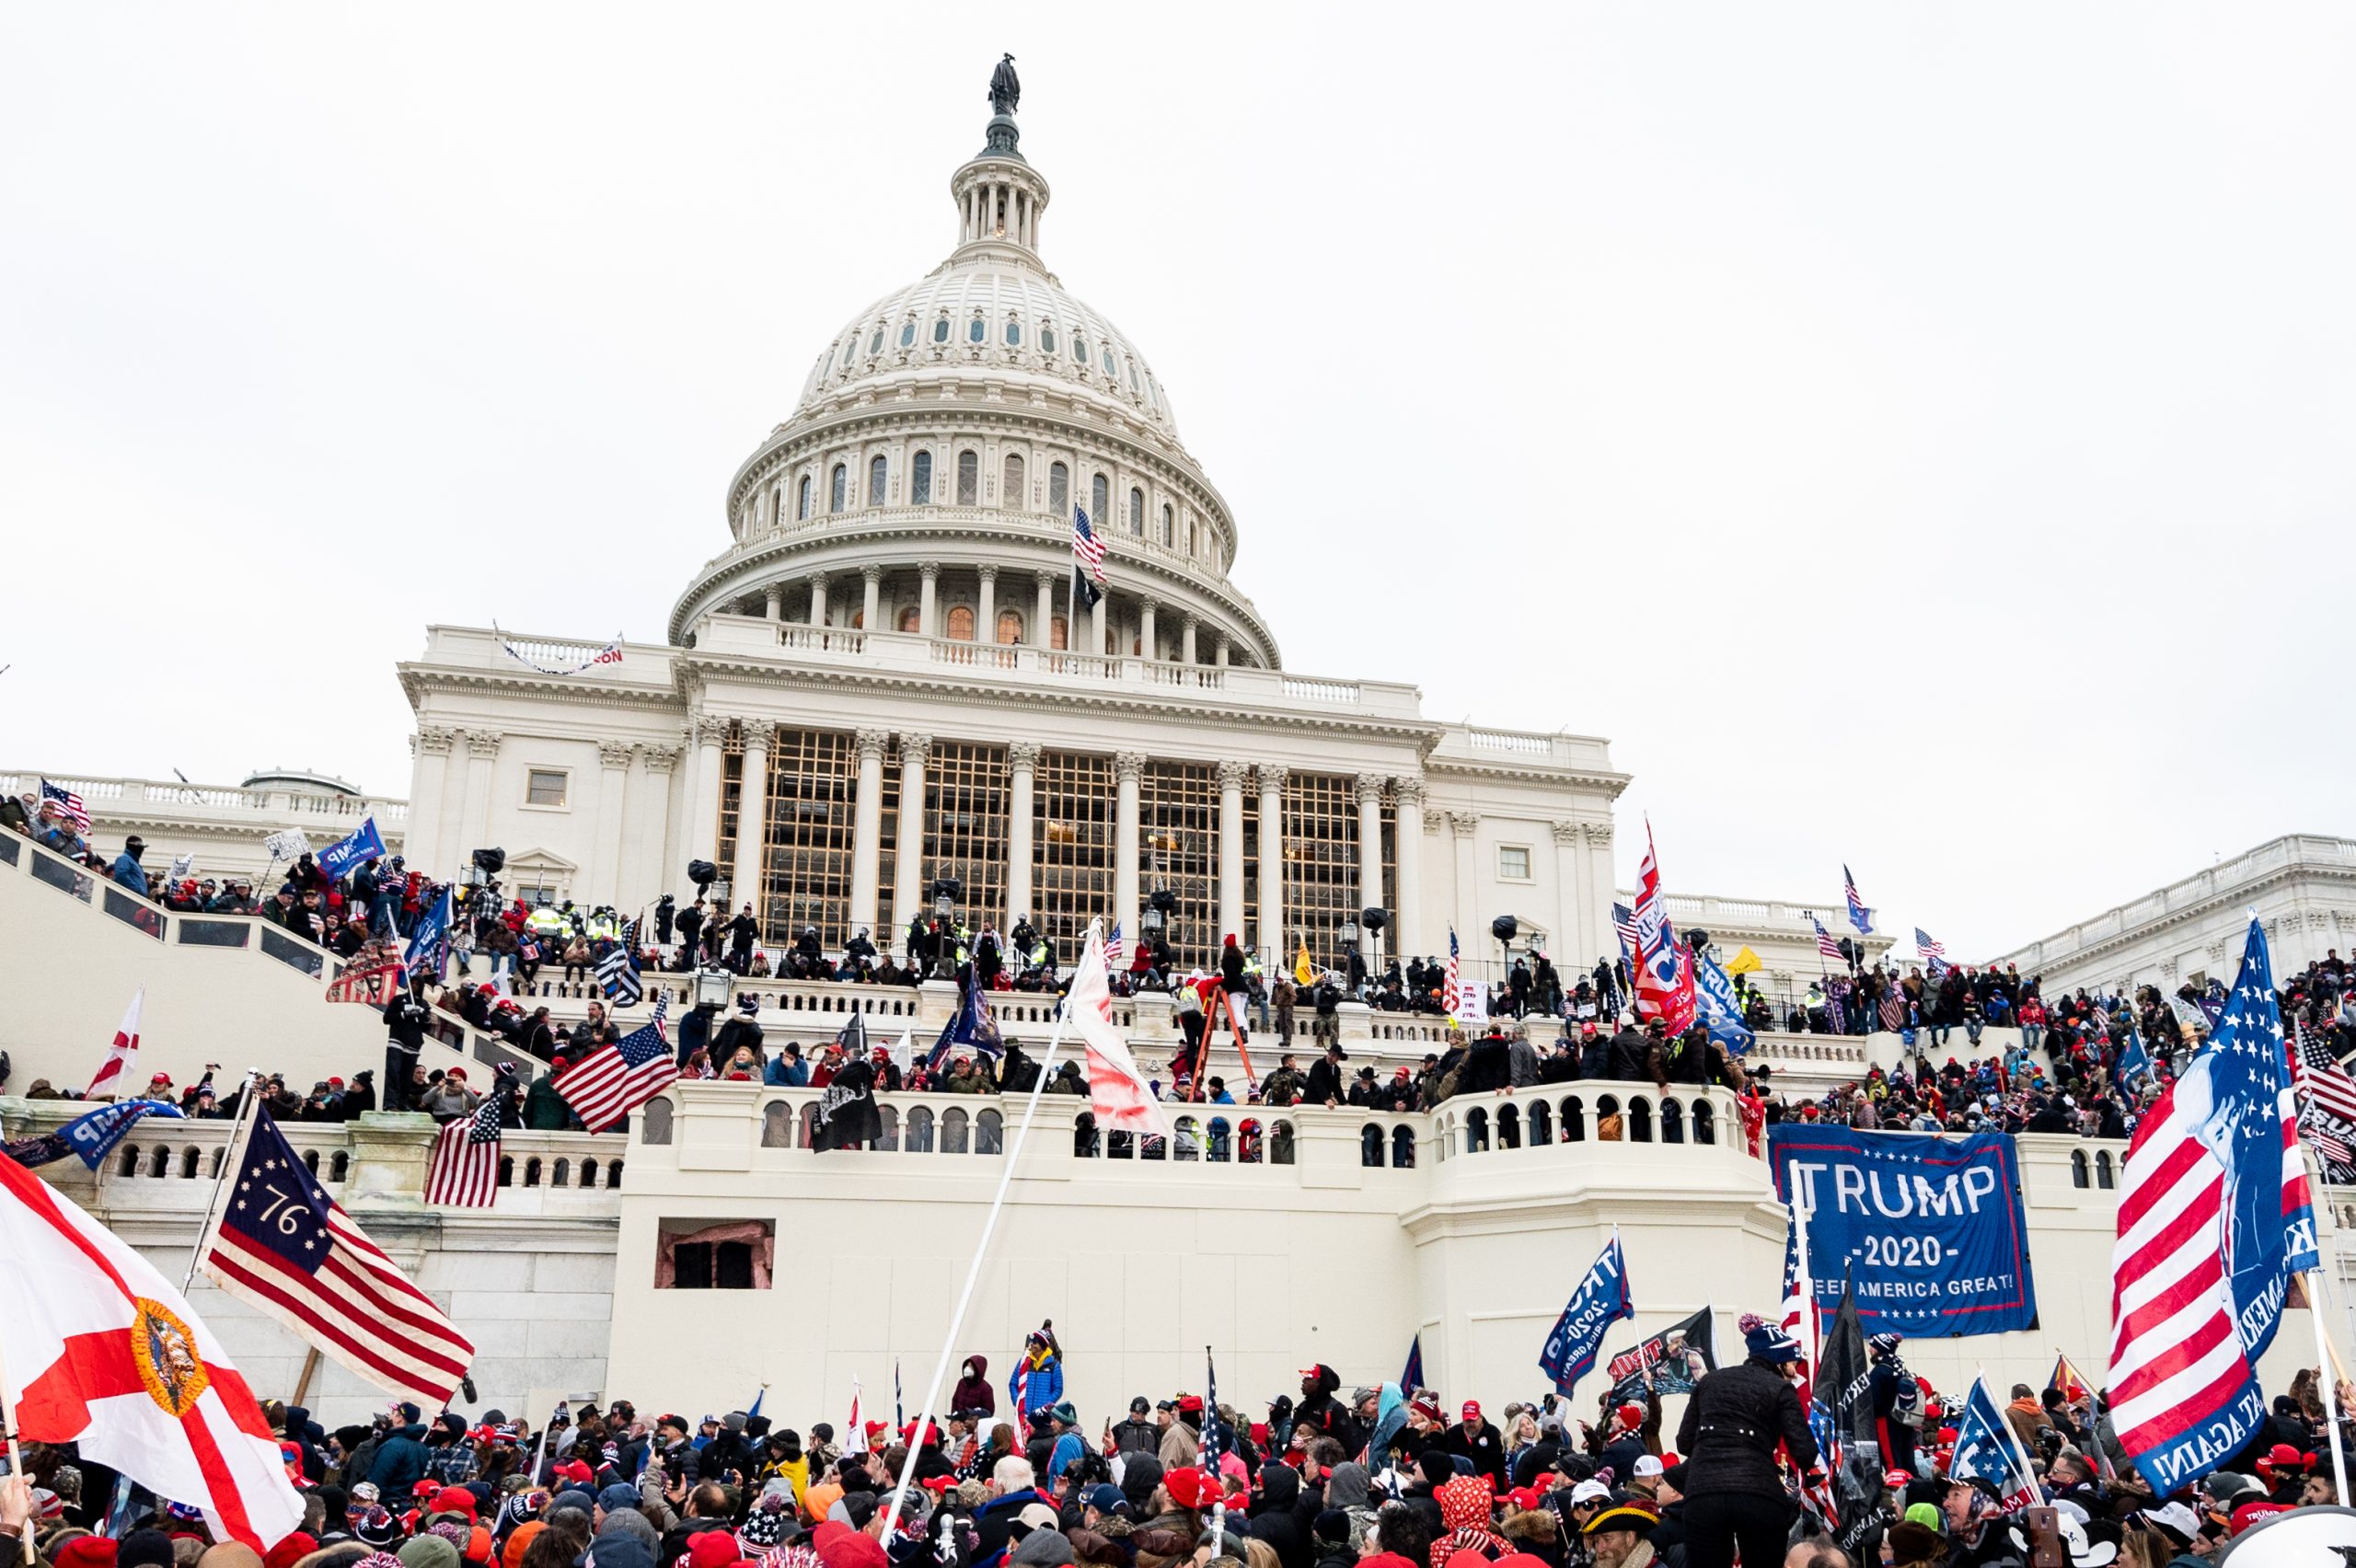 After the insurrection: How domestic extremists adapted and evolved after the January 6 US Capitol attack